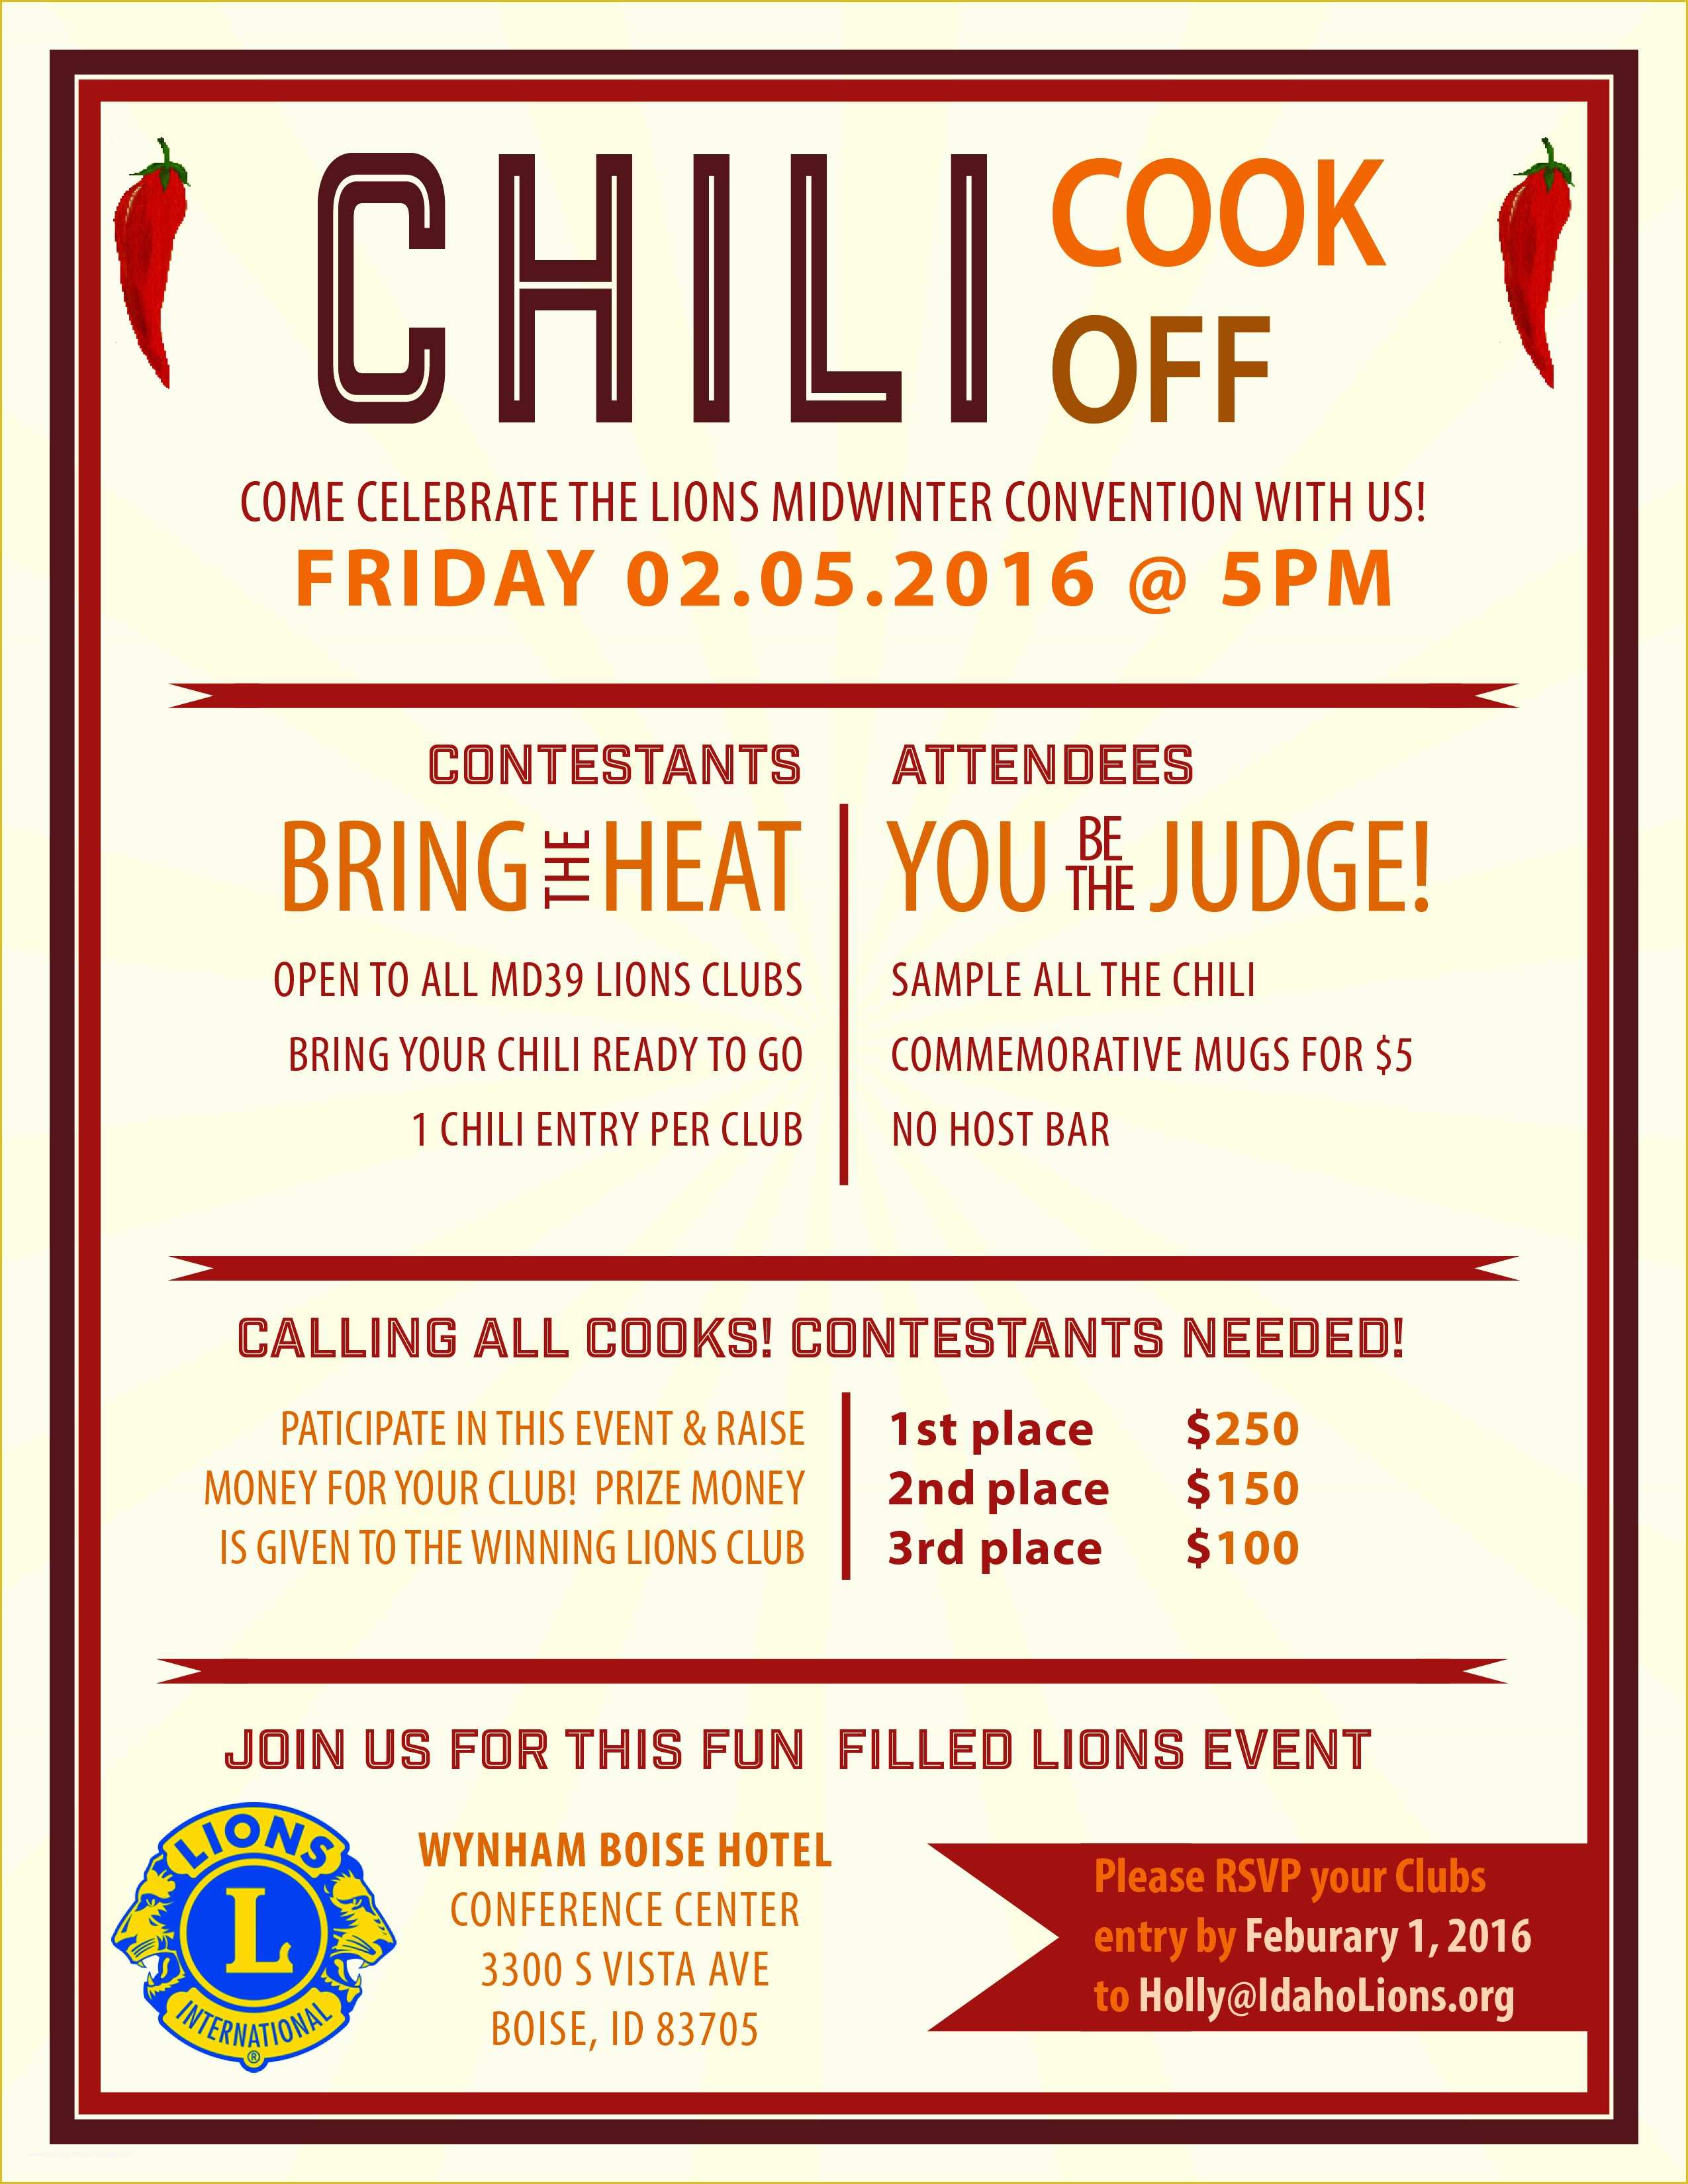 chili-cook-off-flyer-template-free-of-chili-cook-f-flyer-template-free